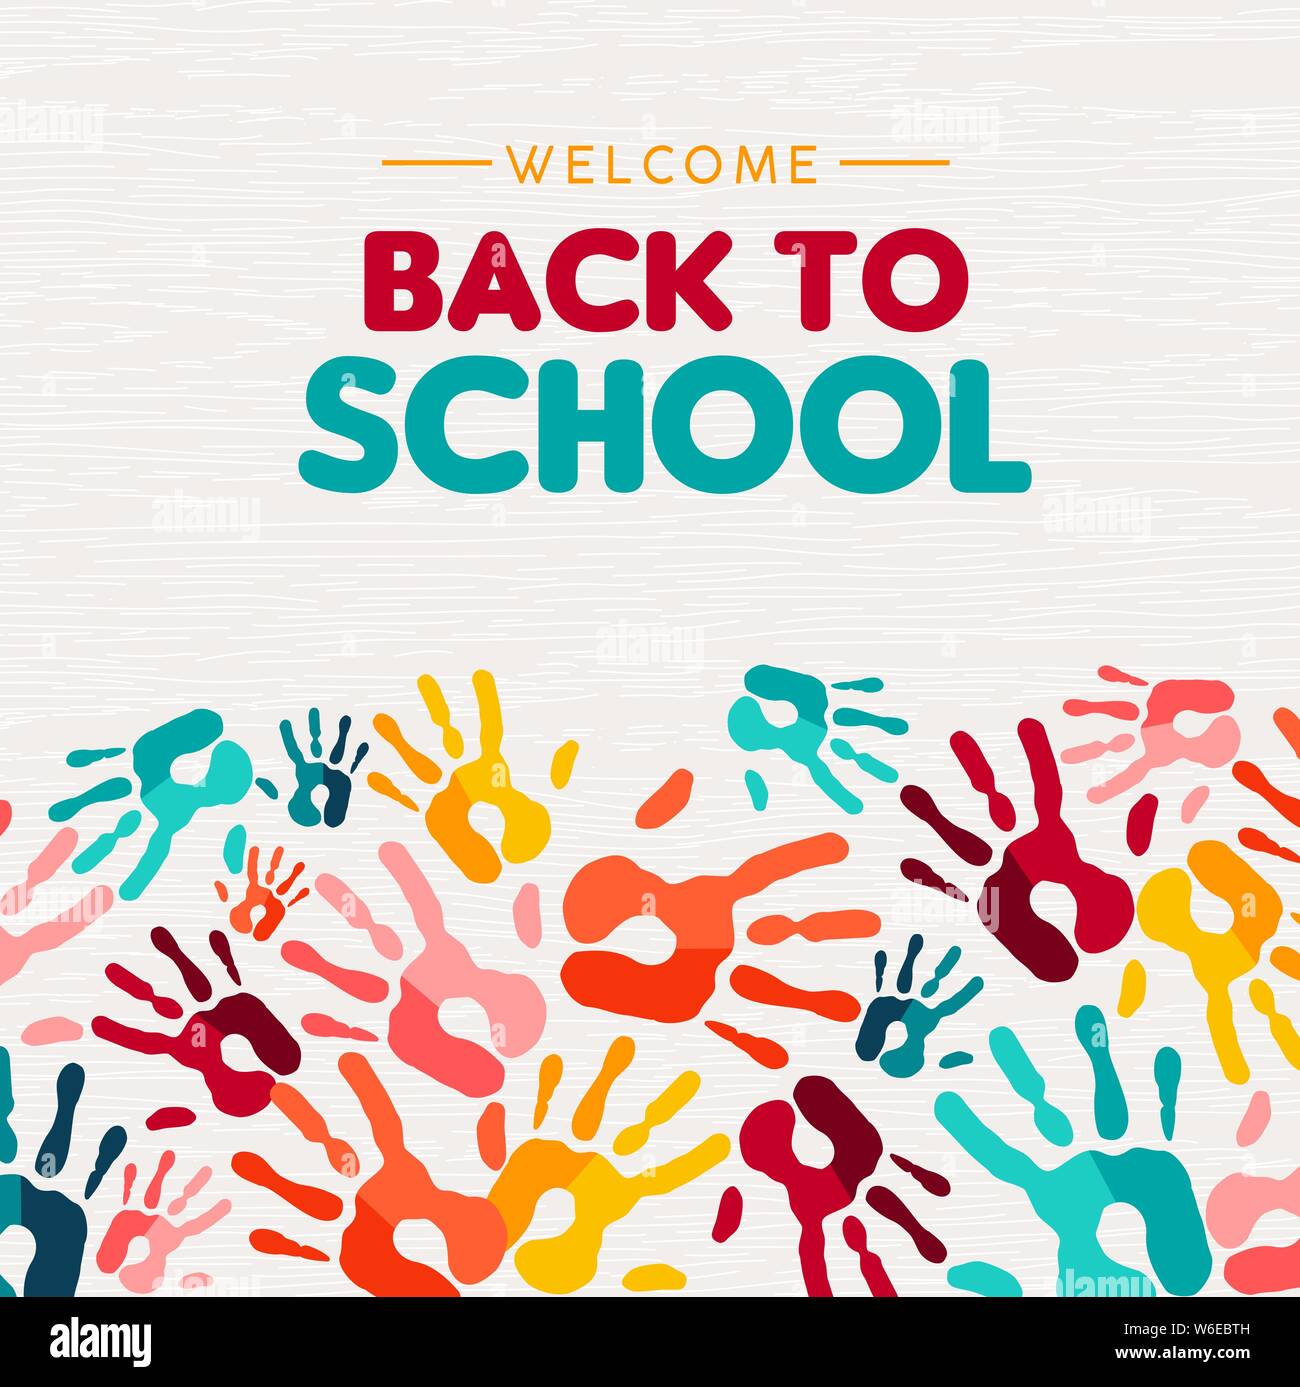 Welcome Back To School Greeting Card Illustration Of Colorful Children Hand Print Background For Diverse Education Community And Creativity Stock Vector Image Art Alamy